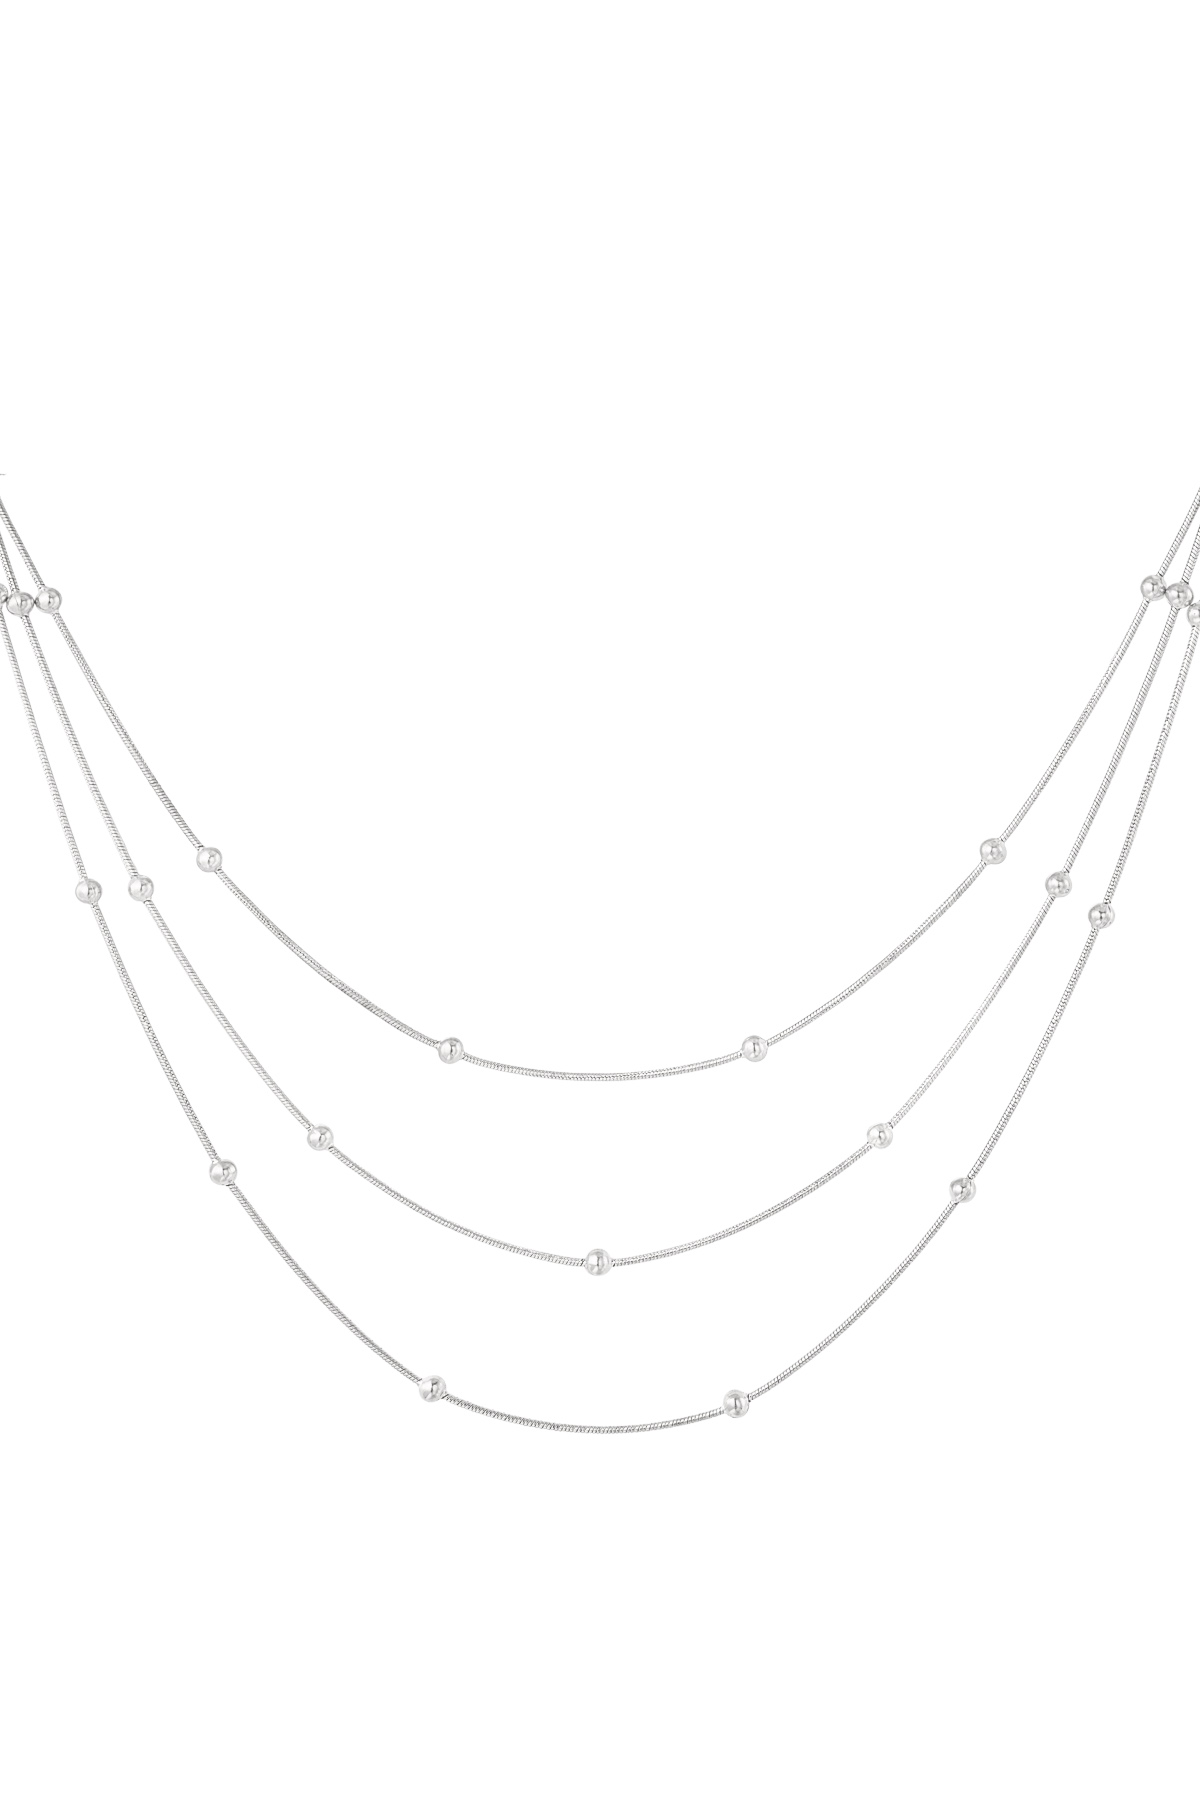 Necklace with a twist - silver h5 